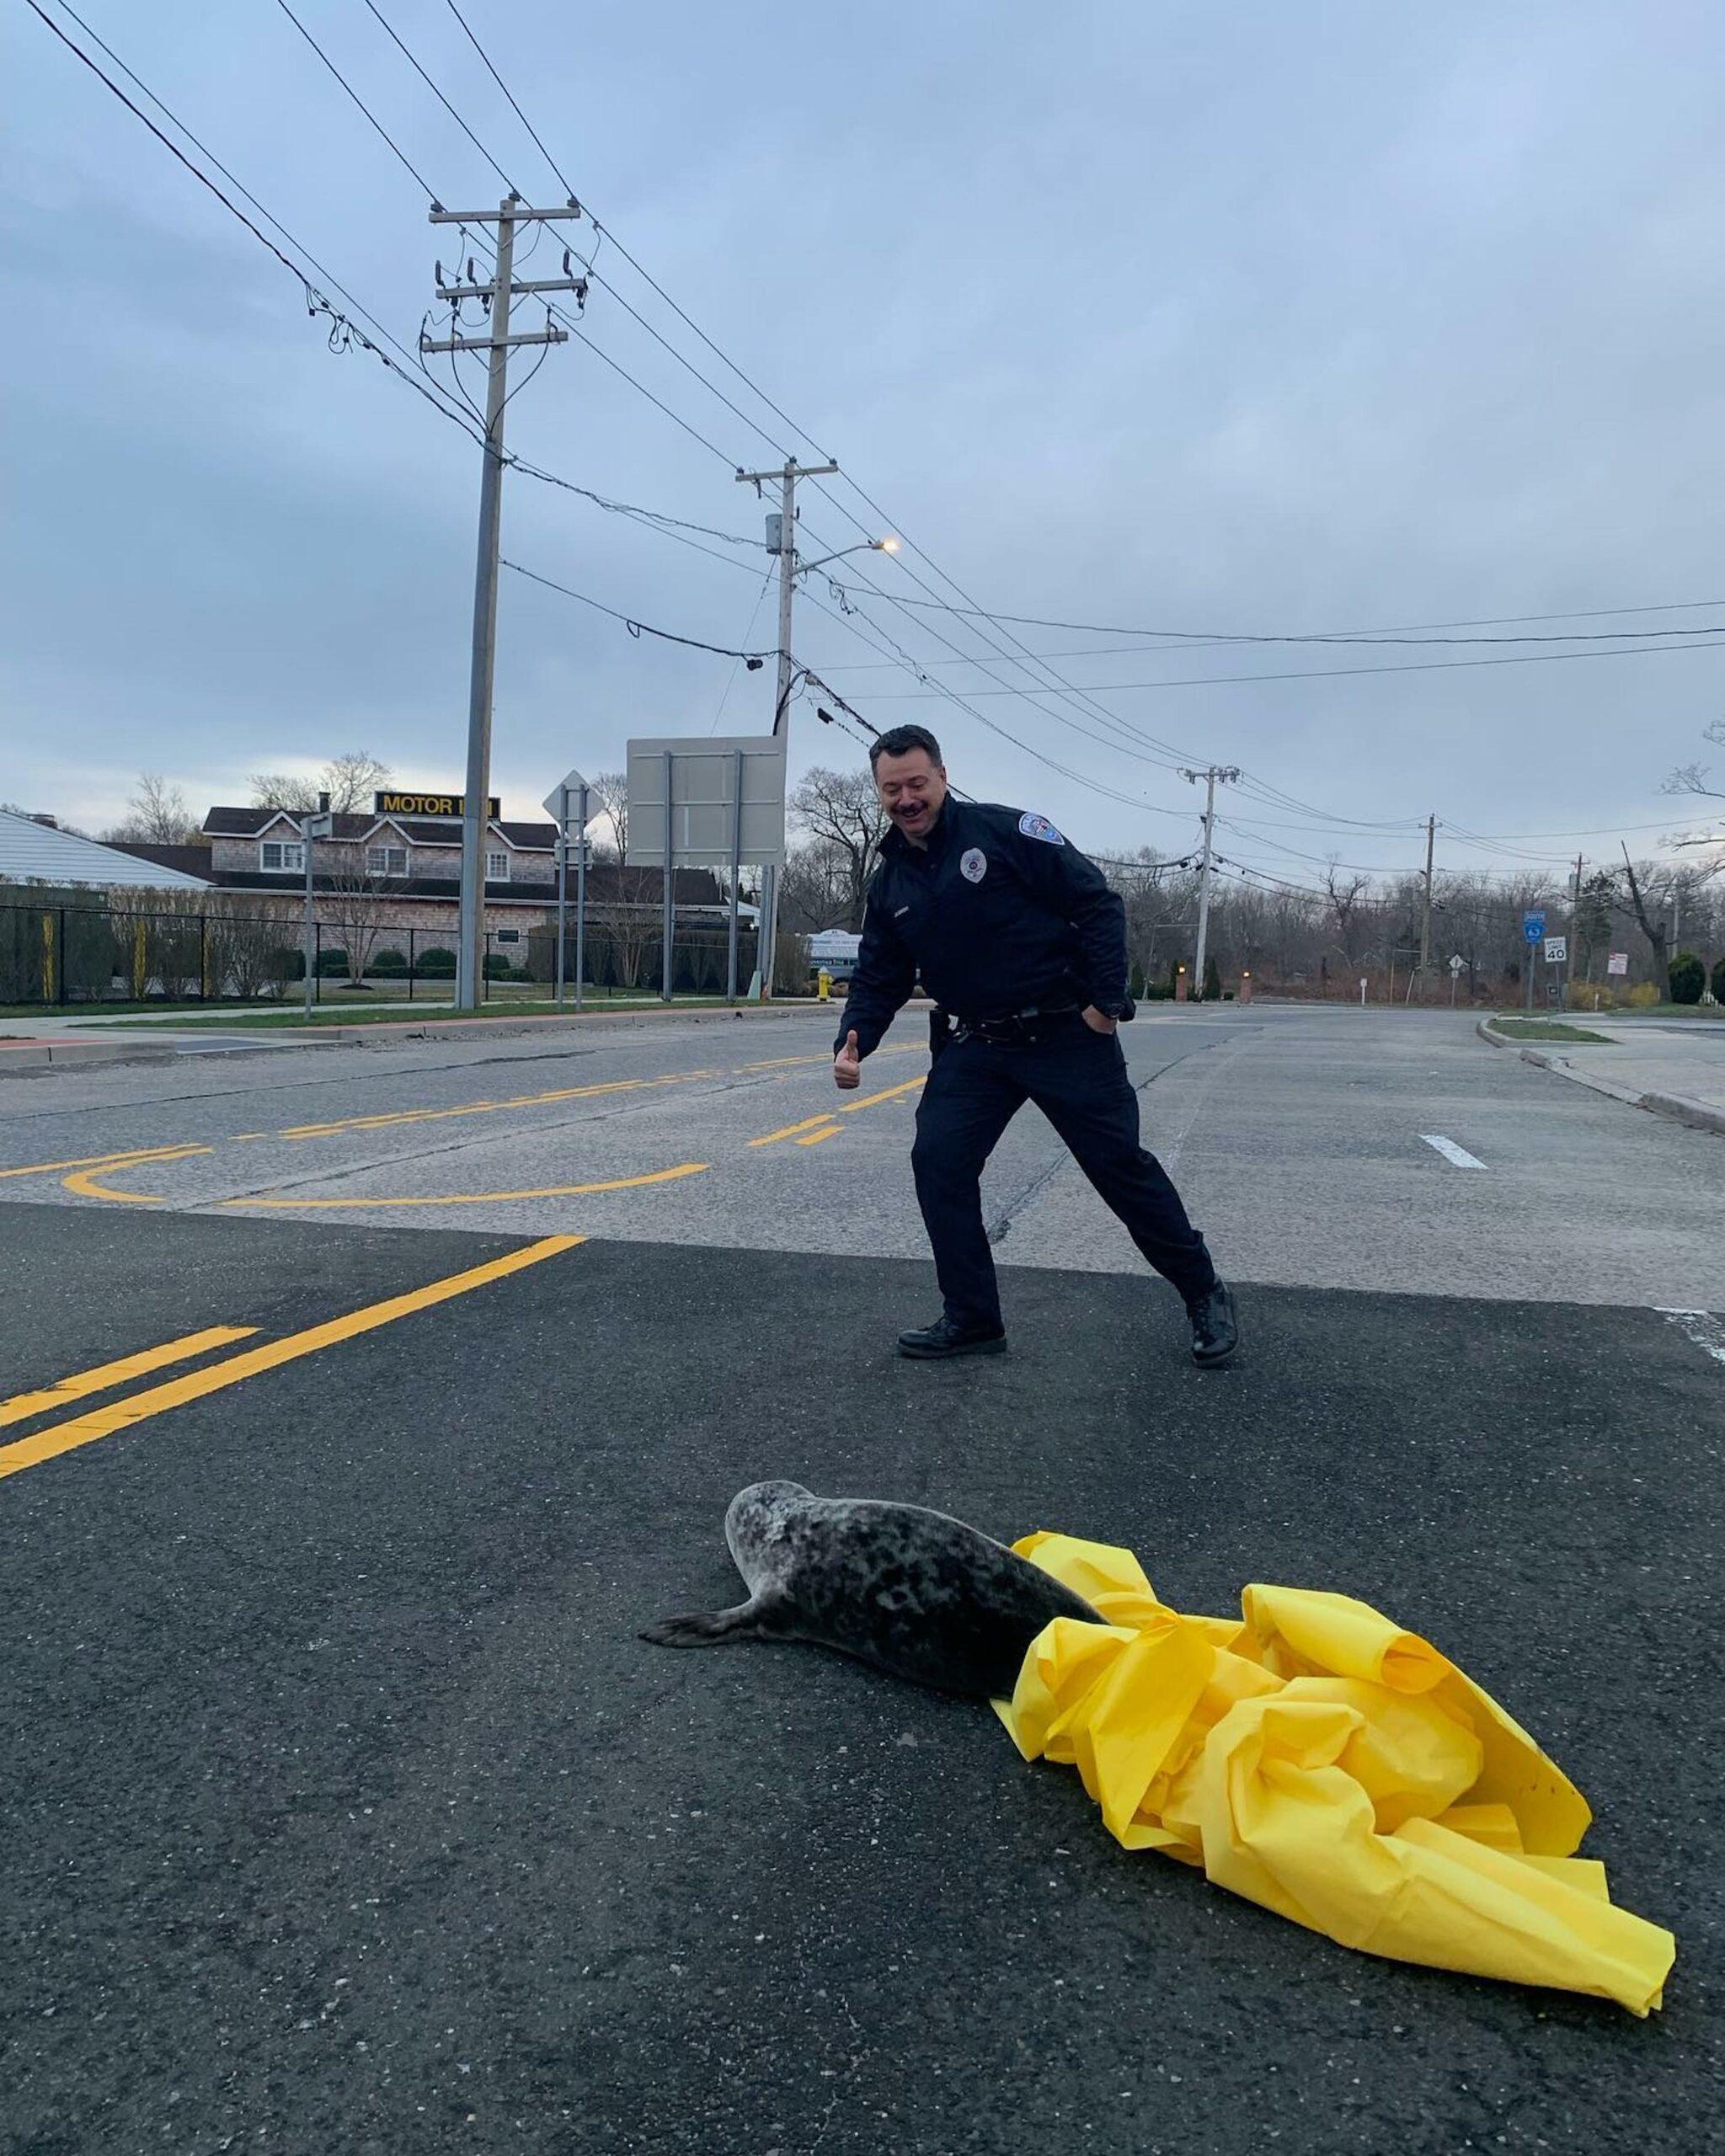 Slippery seal captured by US cops